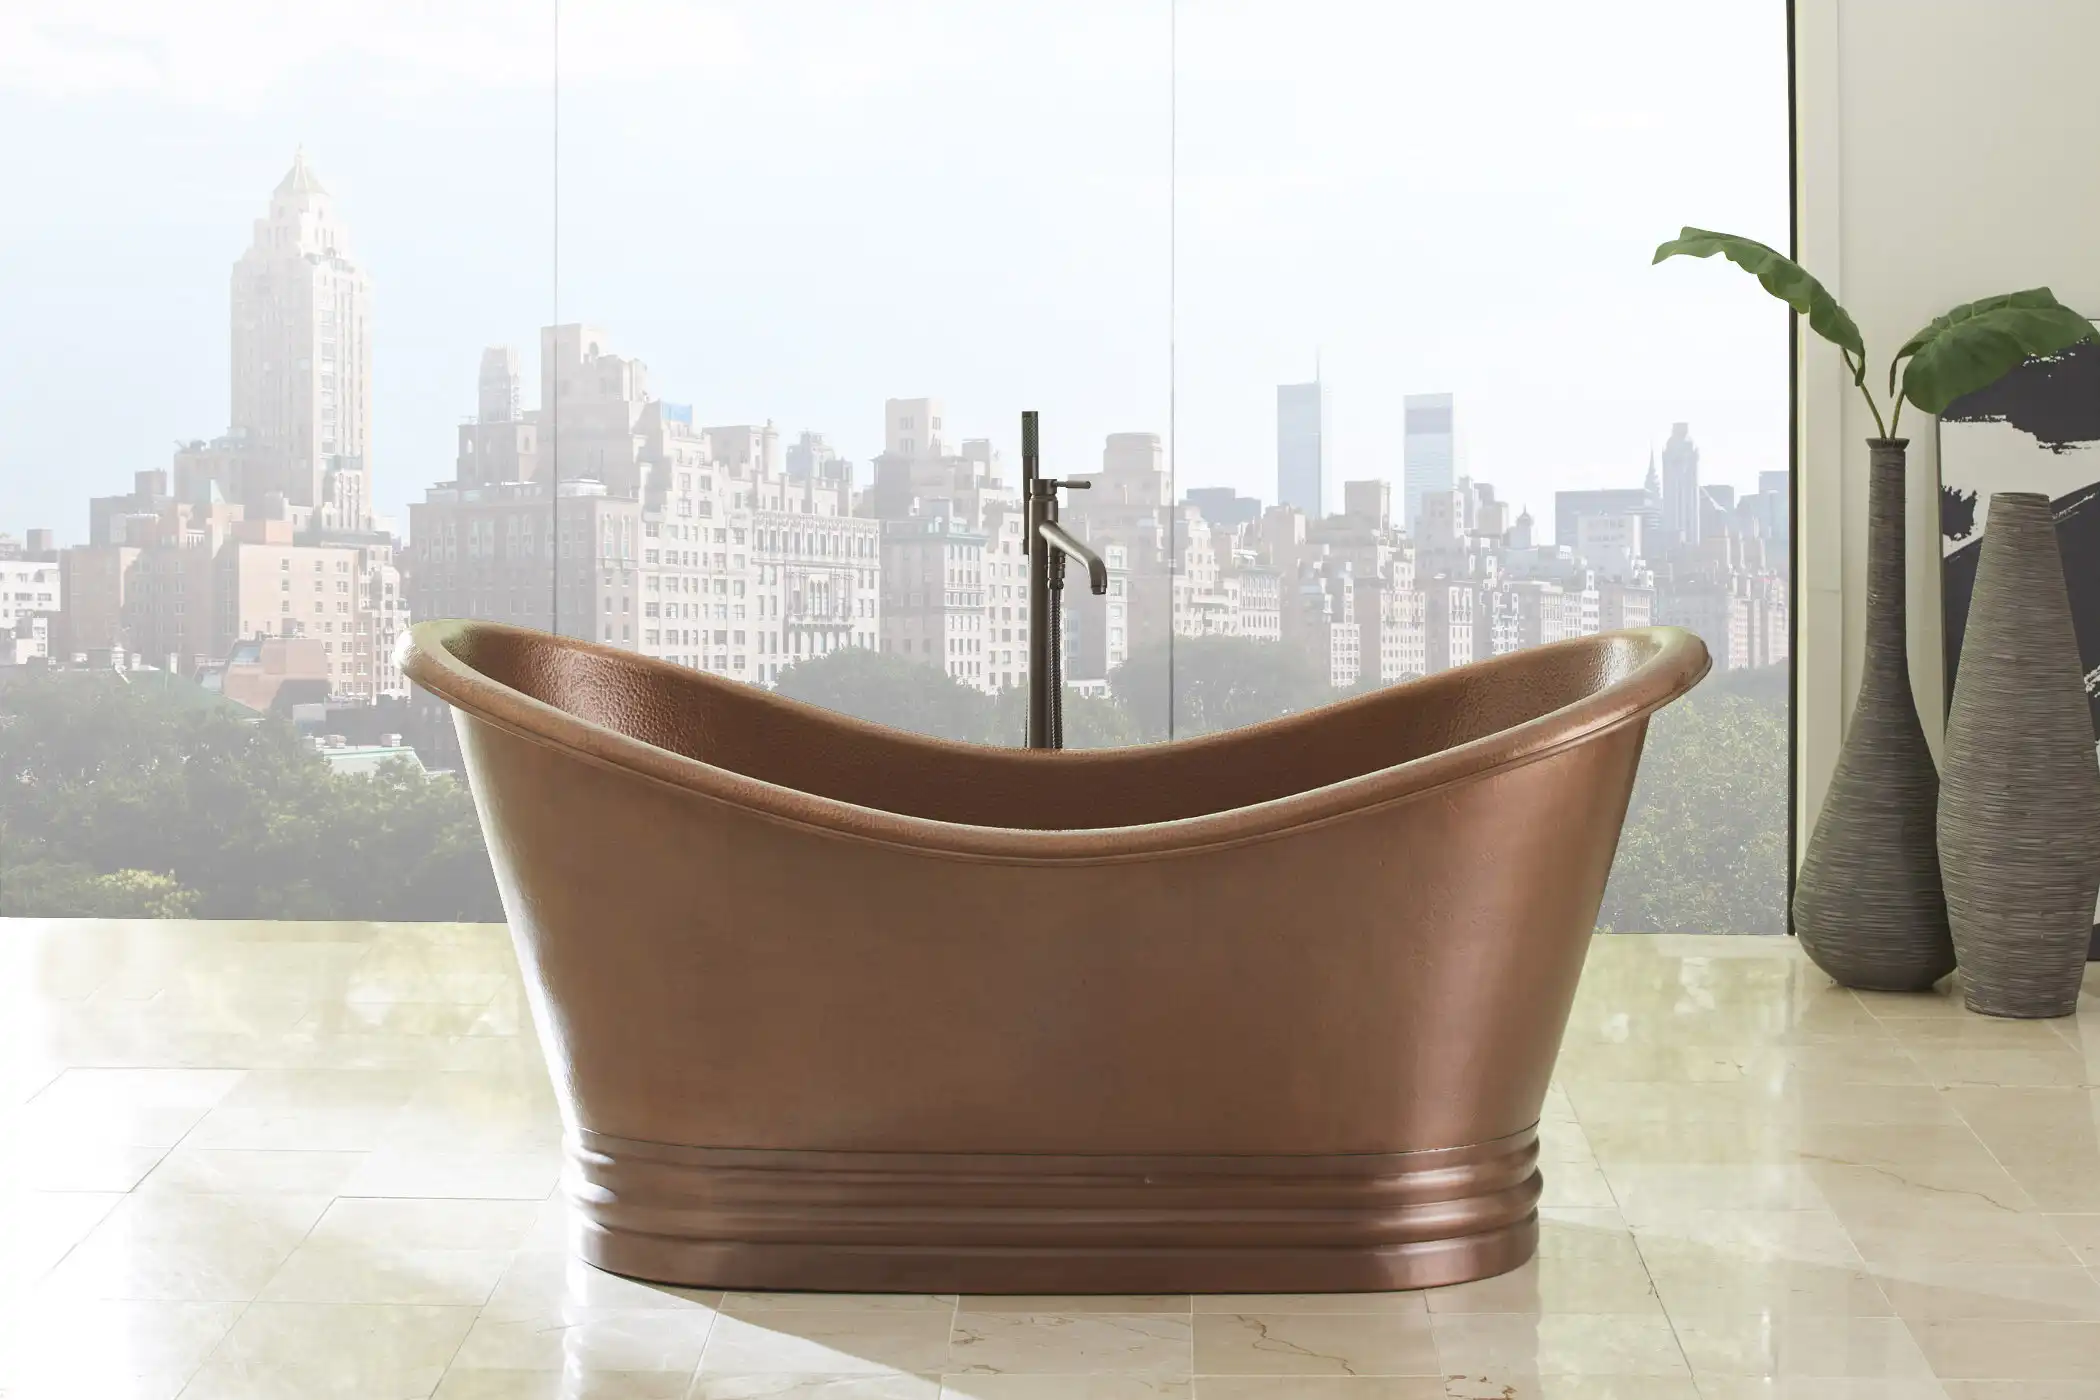 Euclid 6' Freestanding Bathtub in 14-Gauge Solid Copper with Overflow